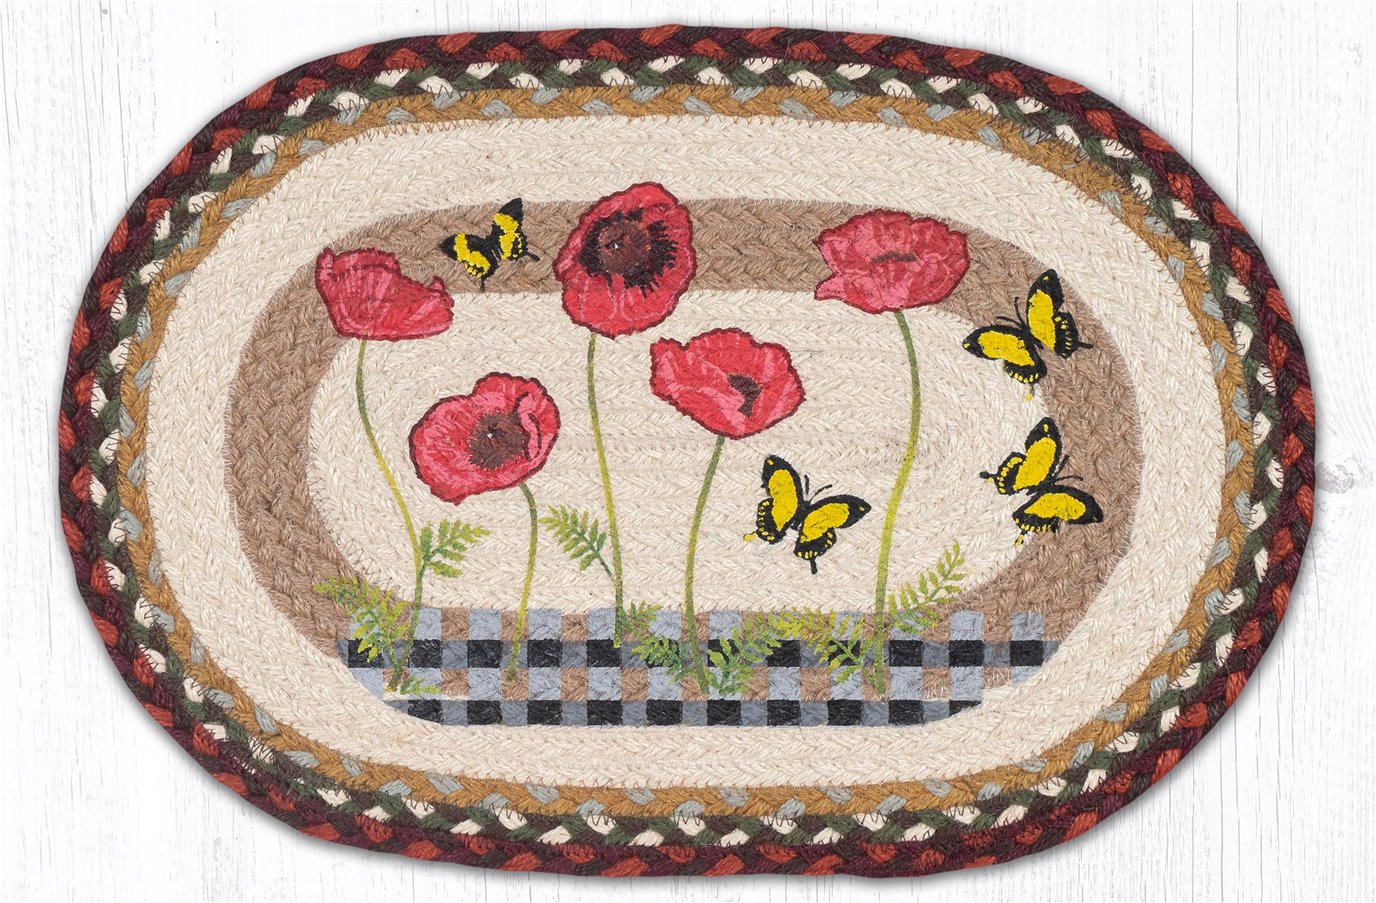 Poppies with Black Check Oval Braided Placemat 13"x19"